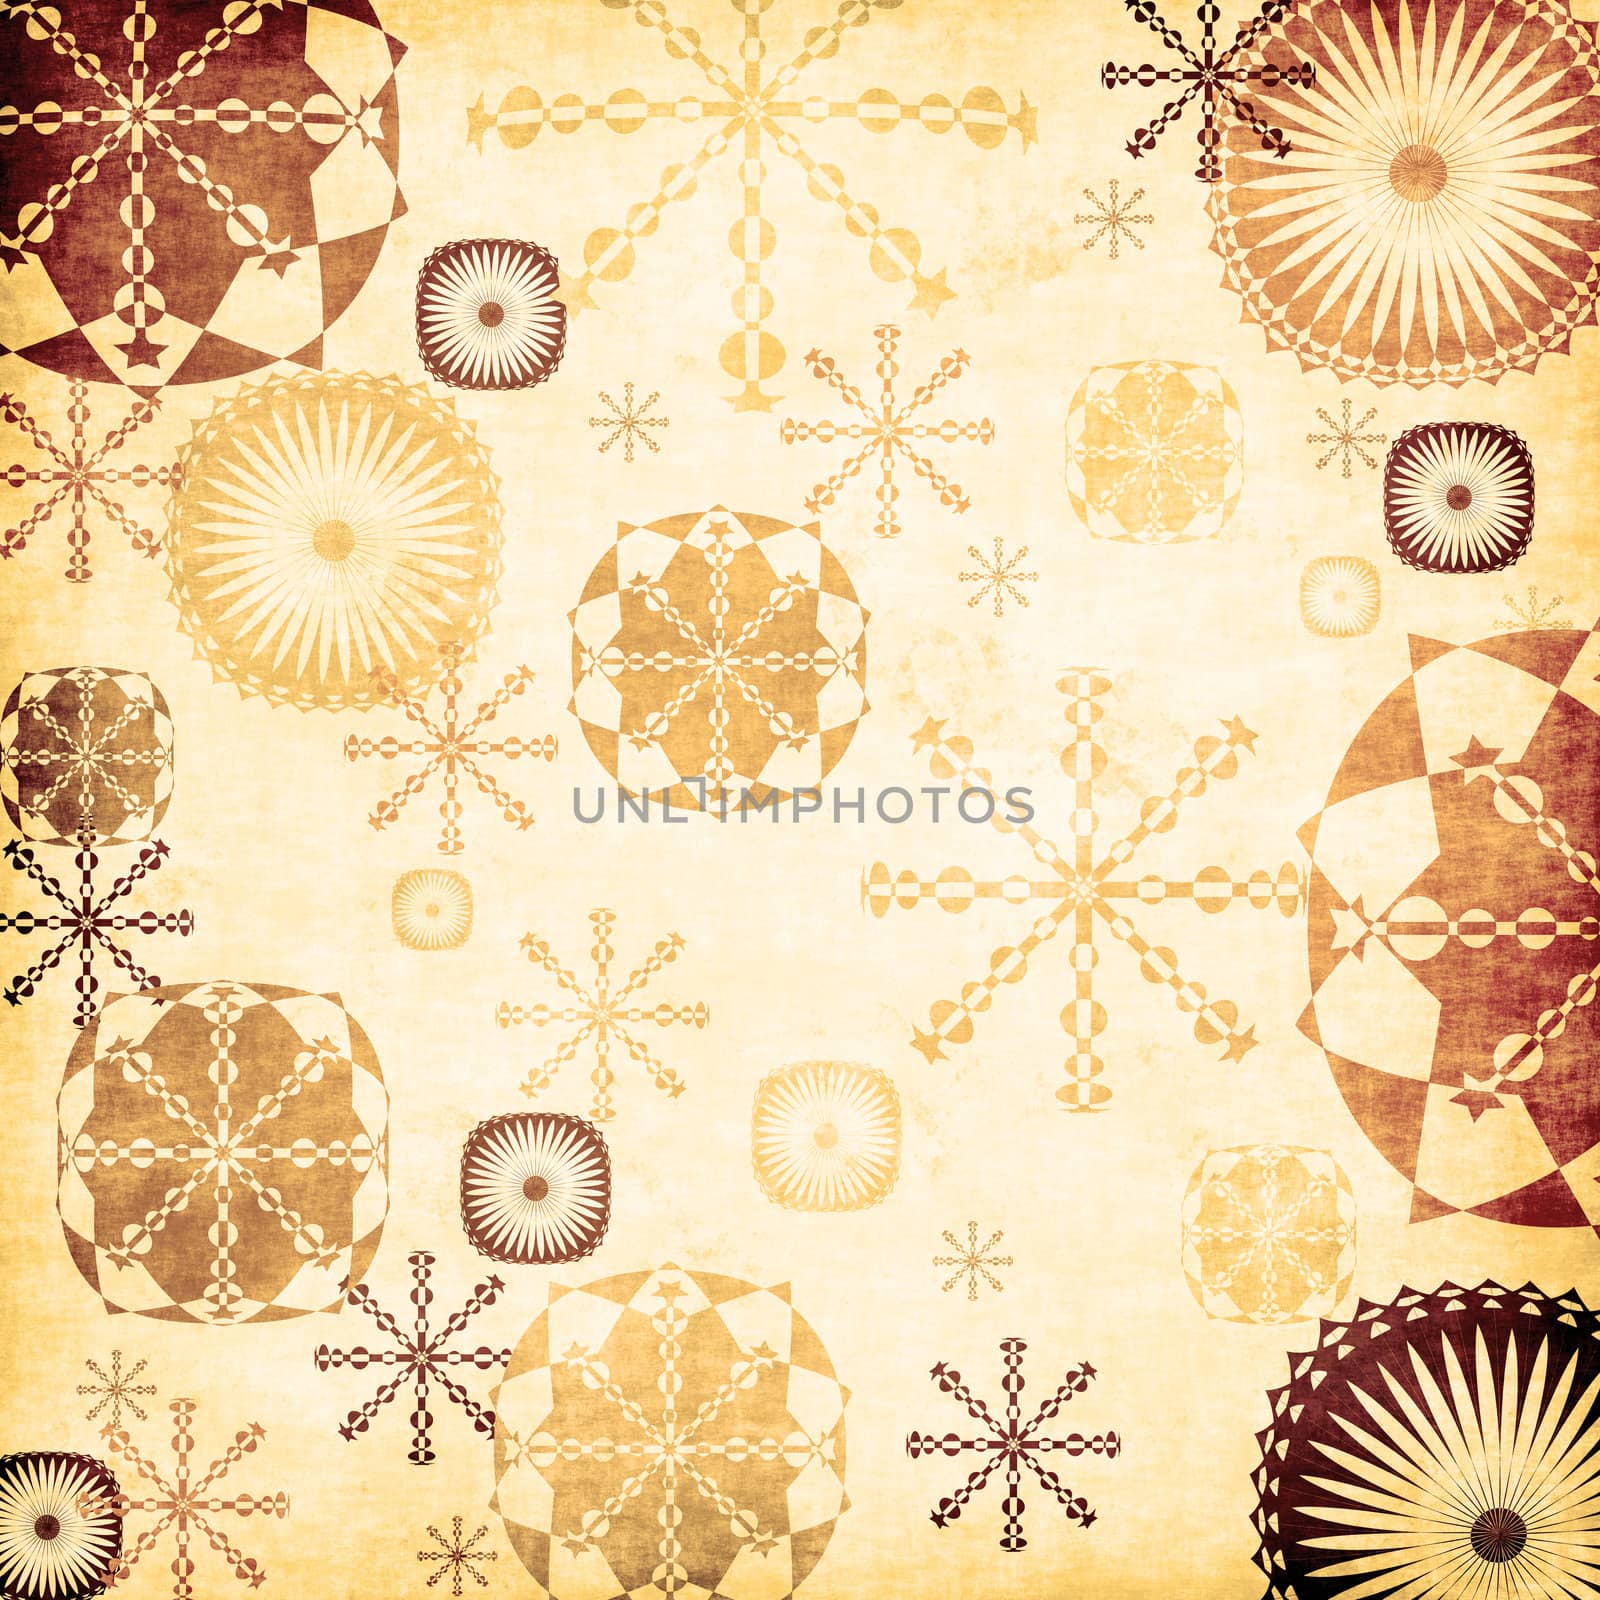 Snowflakes background by Lirch